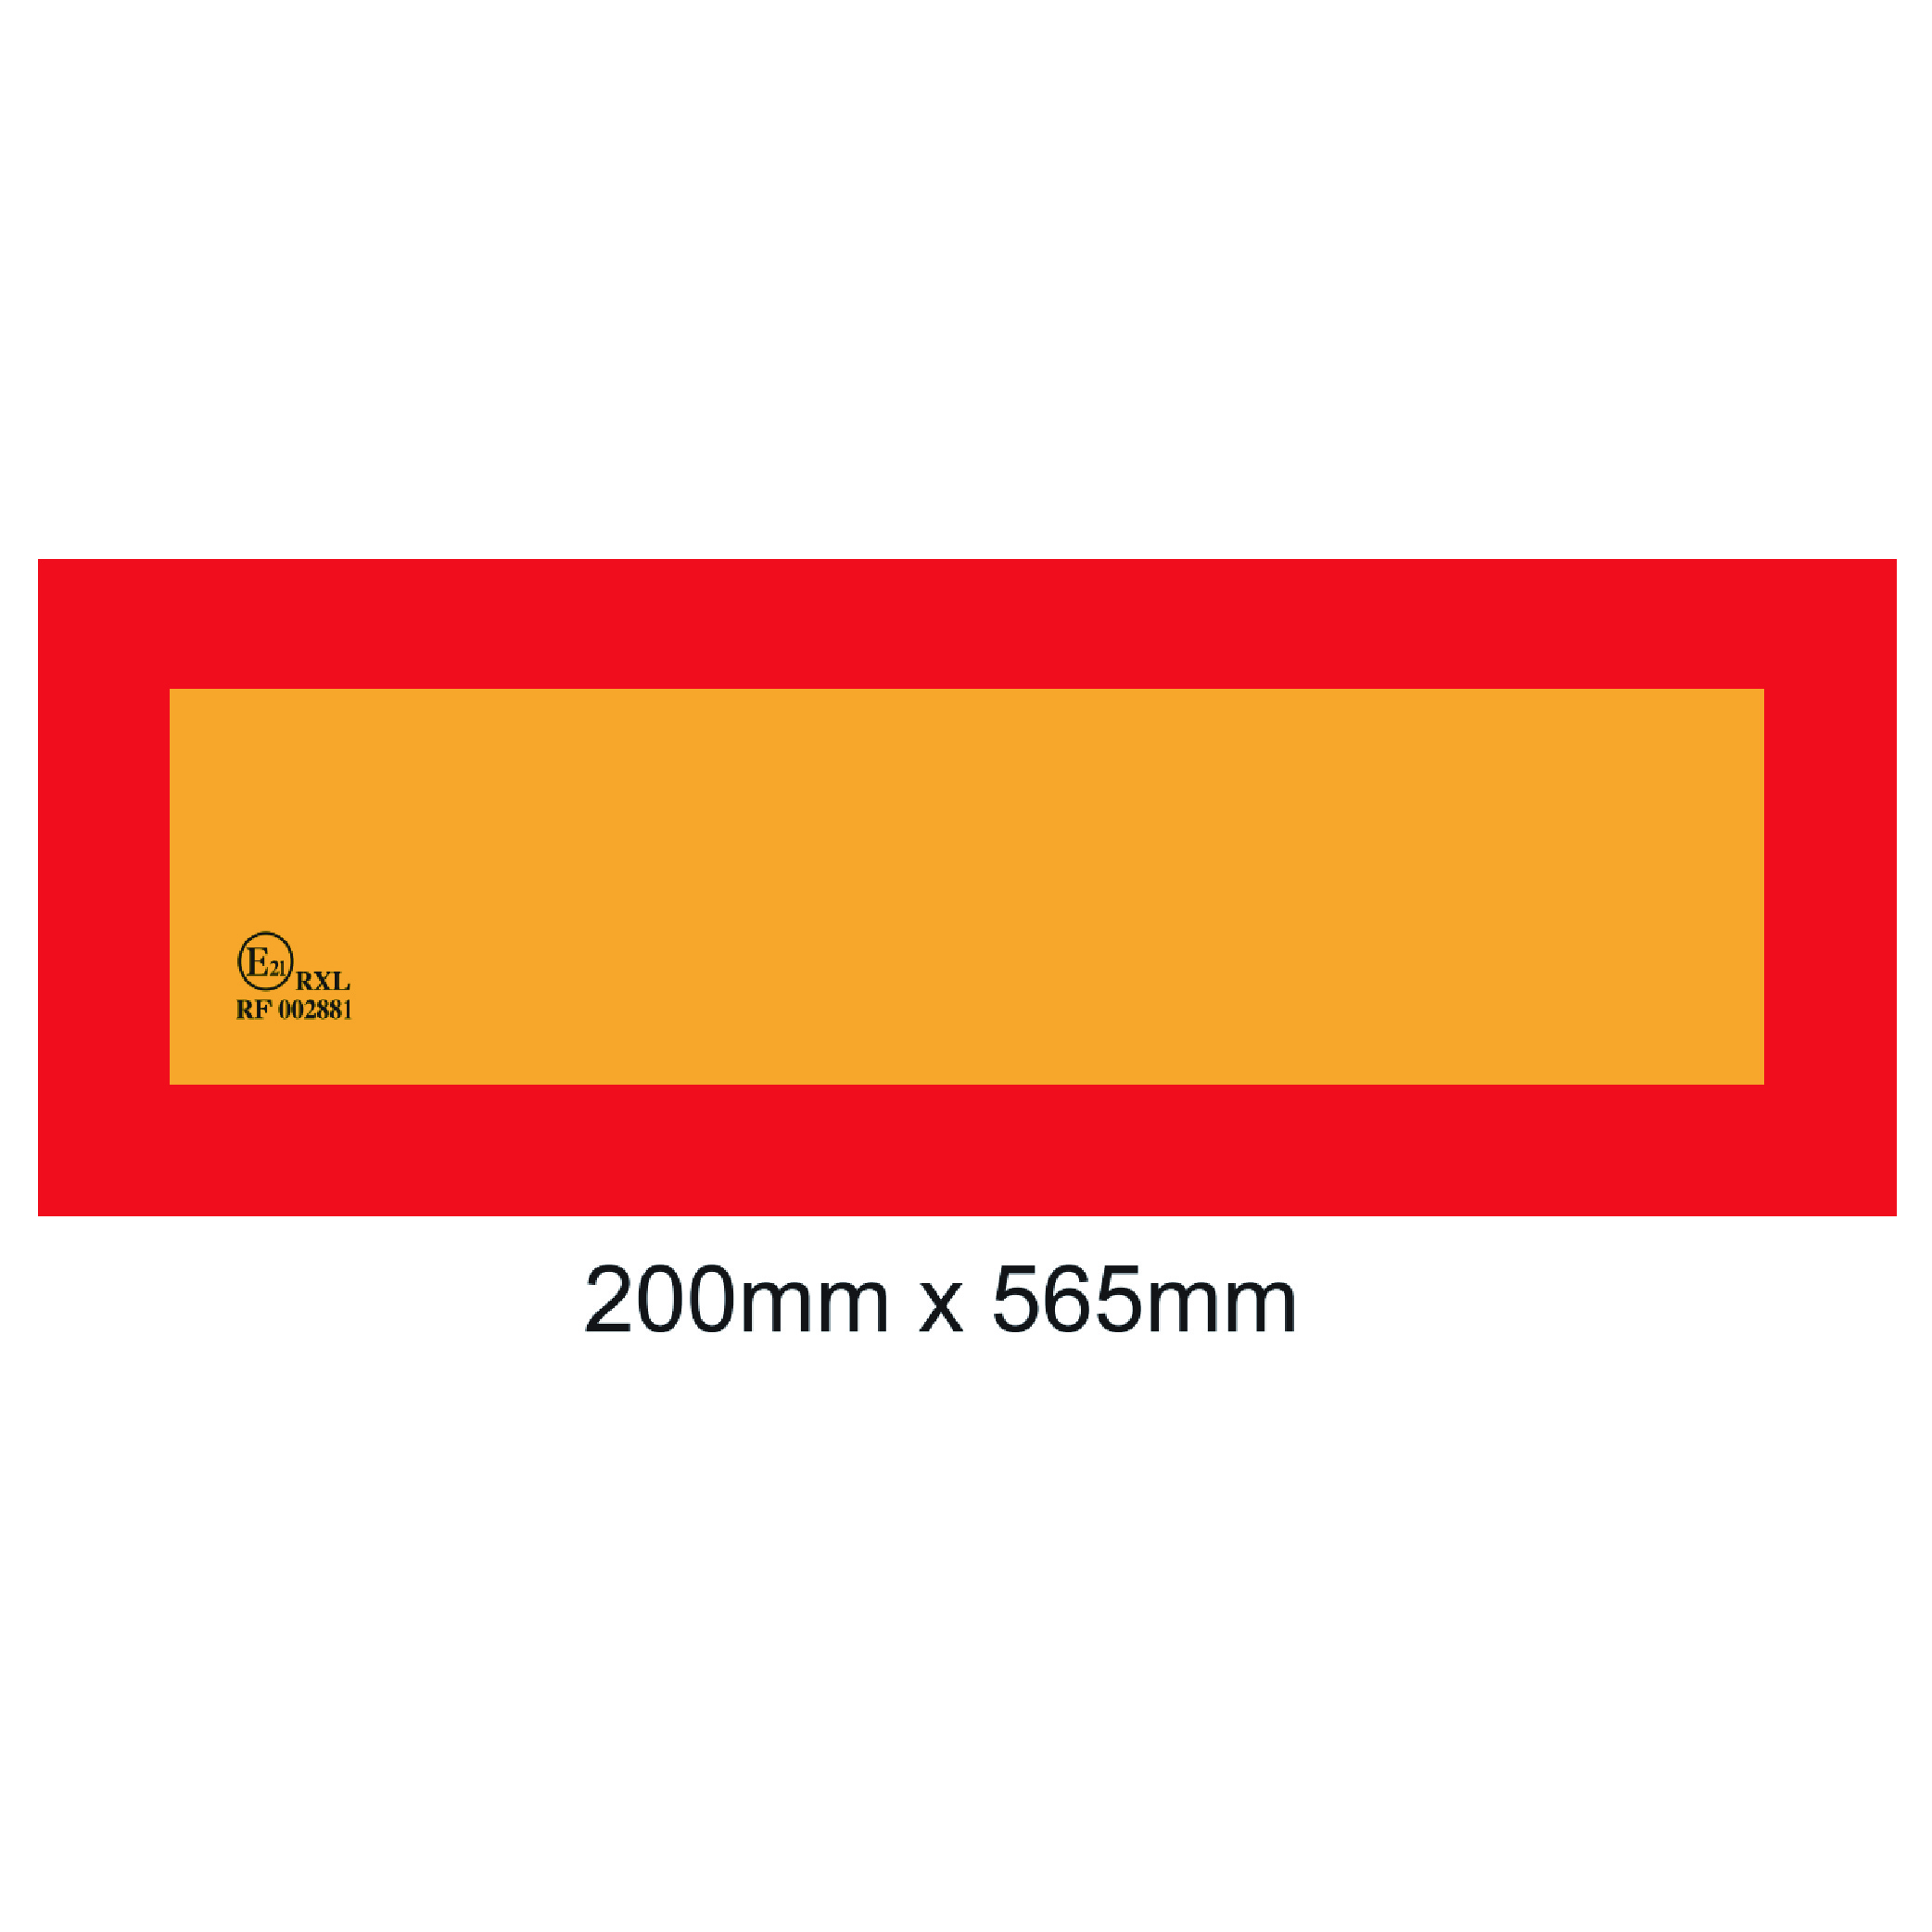 20x56.5cm Reflective Vehicles Rear Plate for Safety Sign